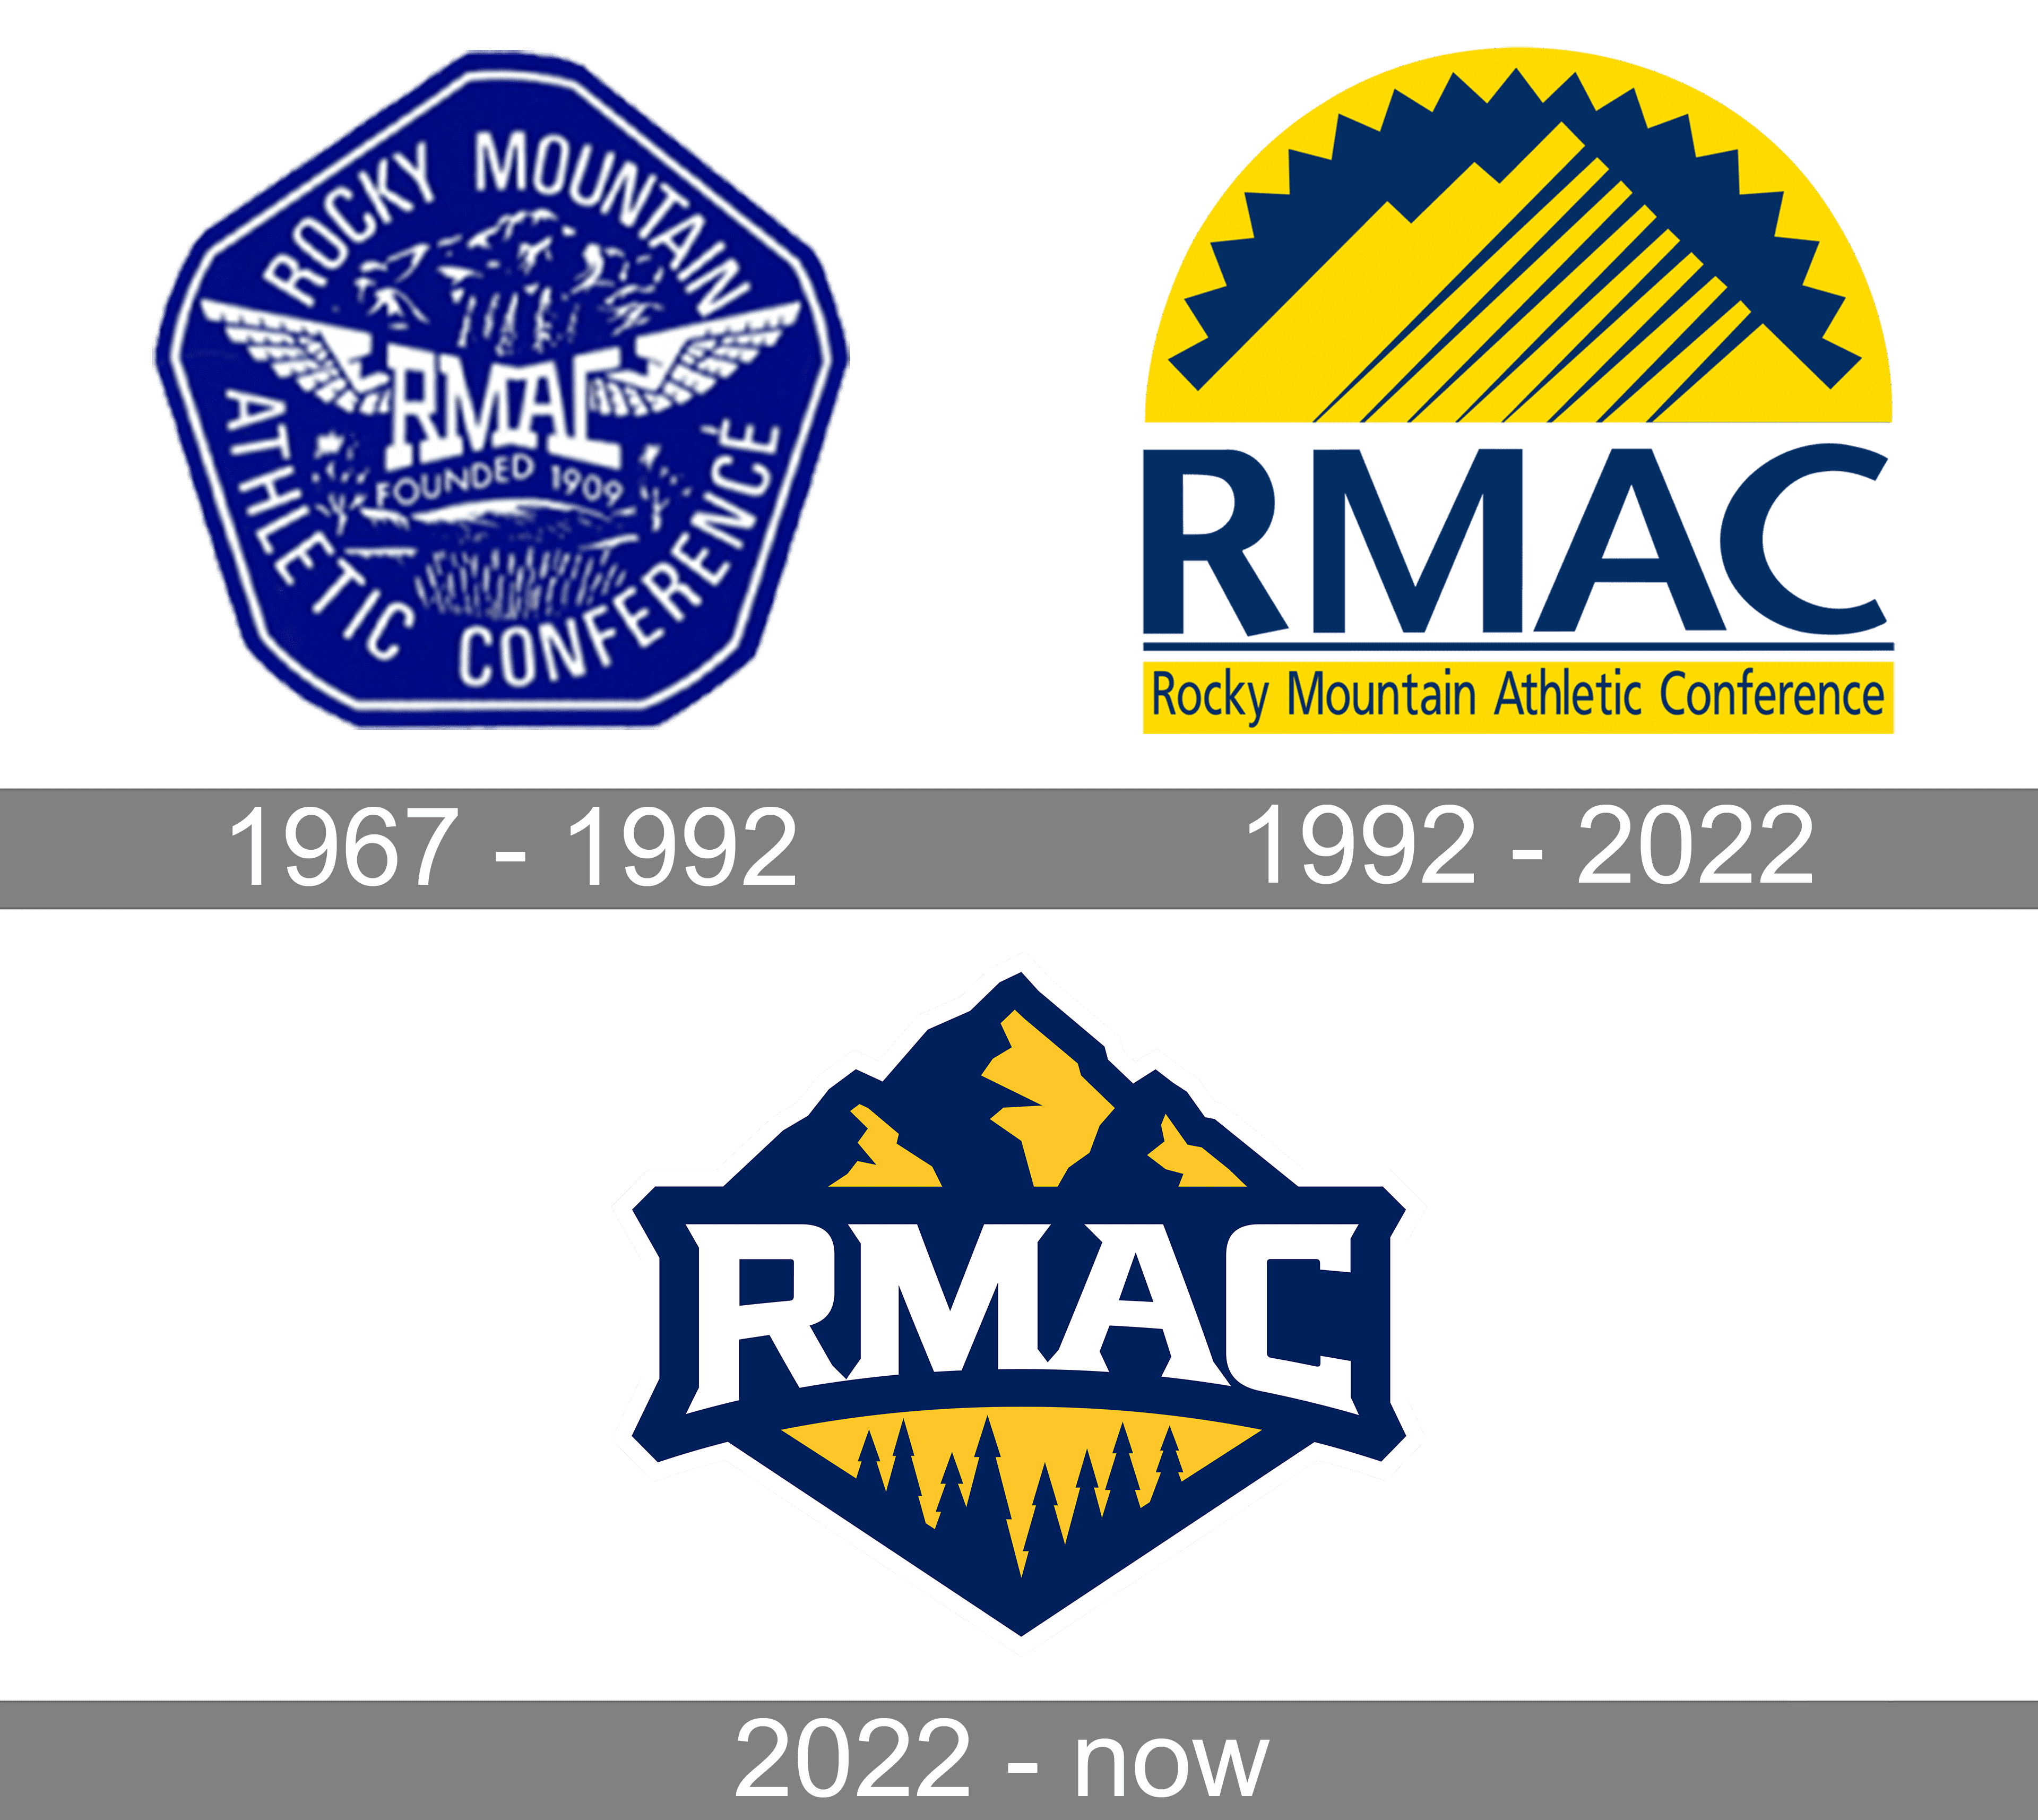 Rocky Mountain Athletic Conference Logo and symbol, meaning